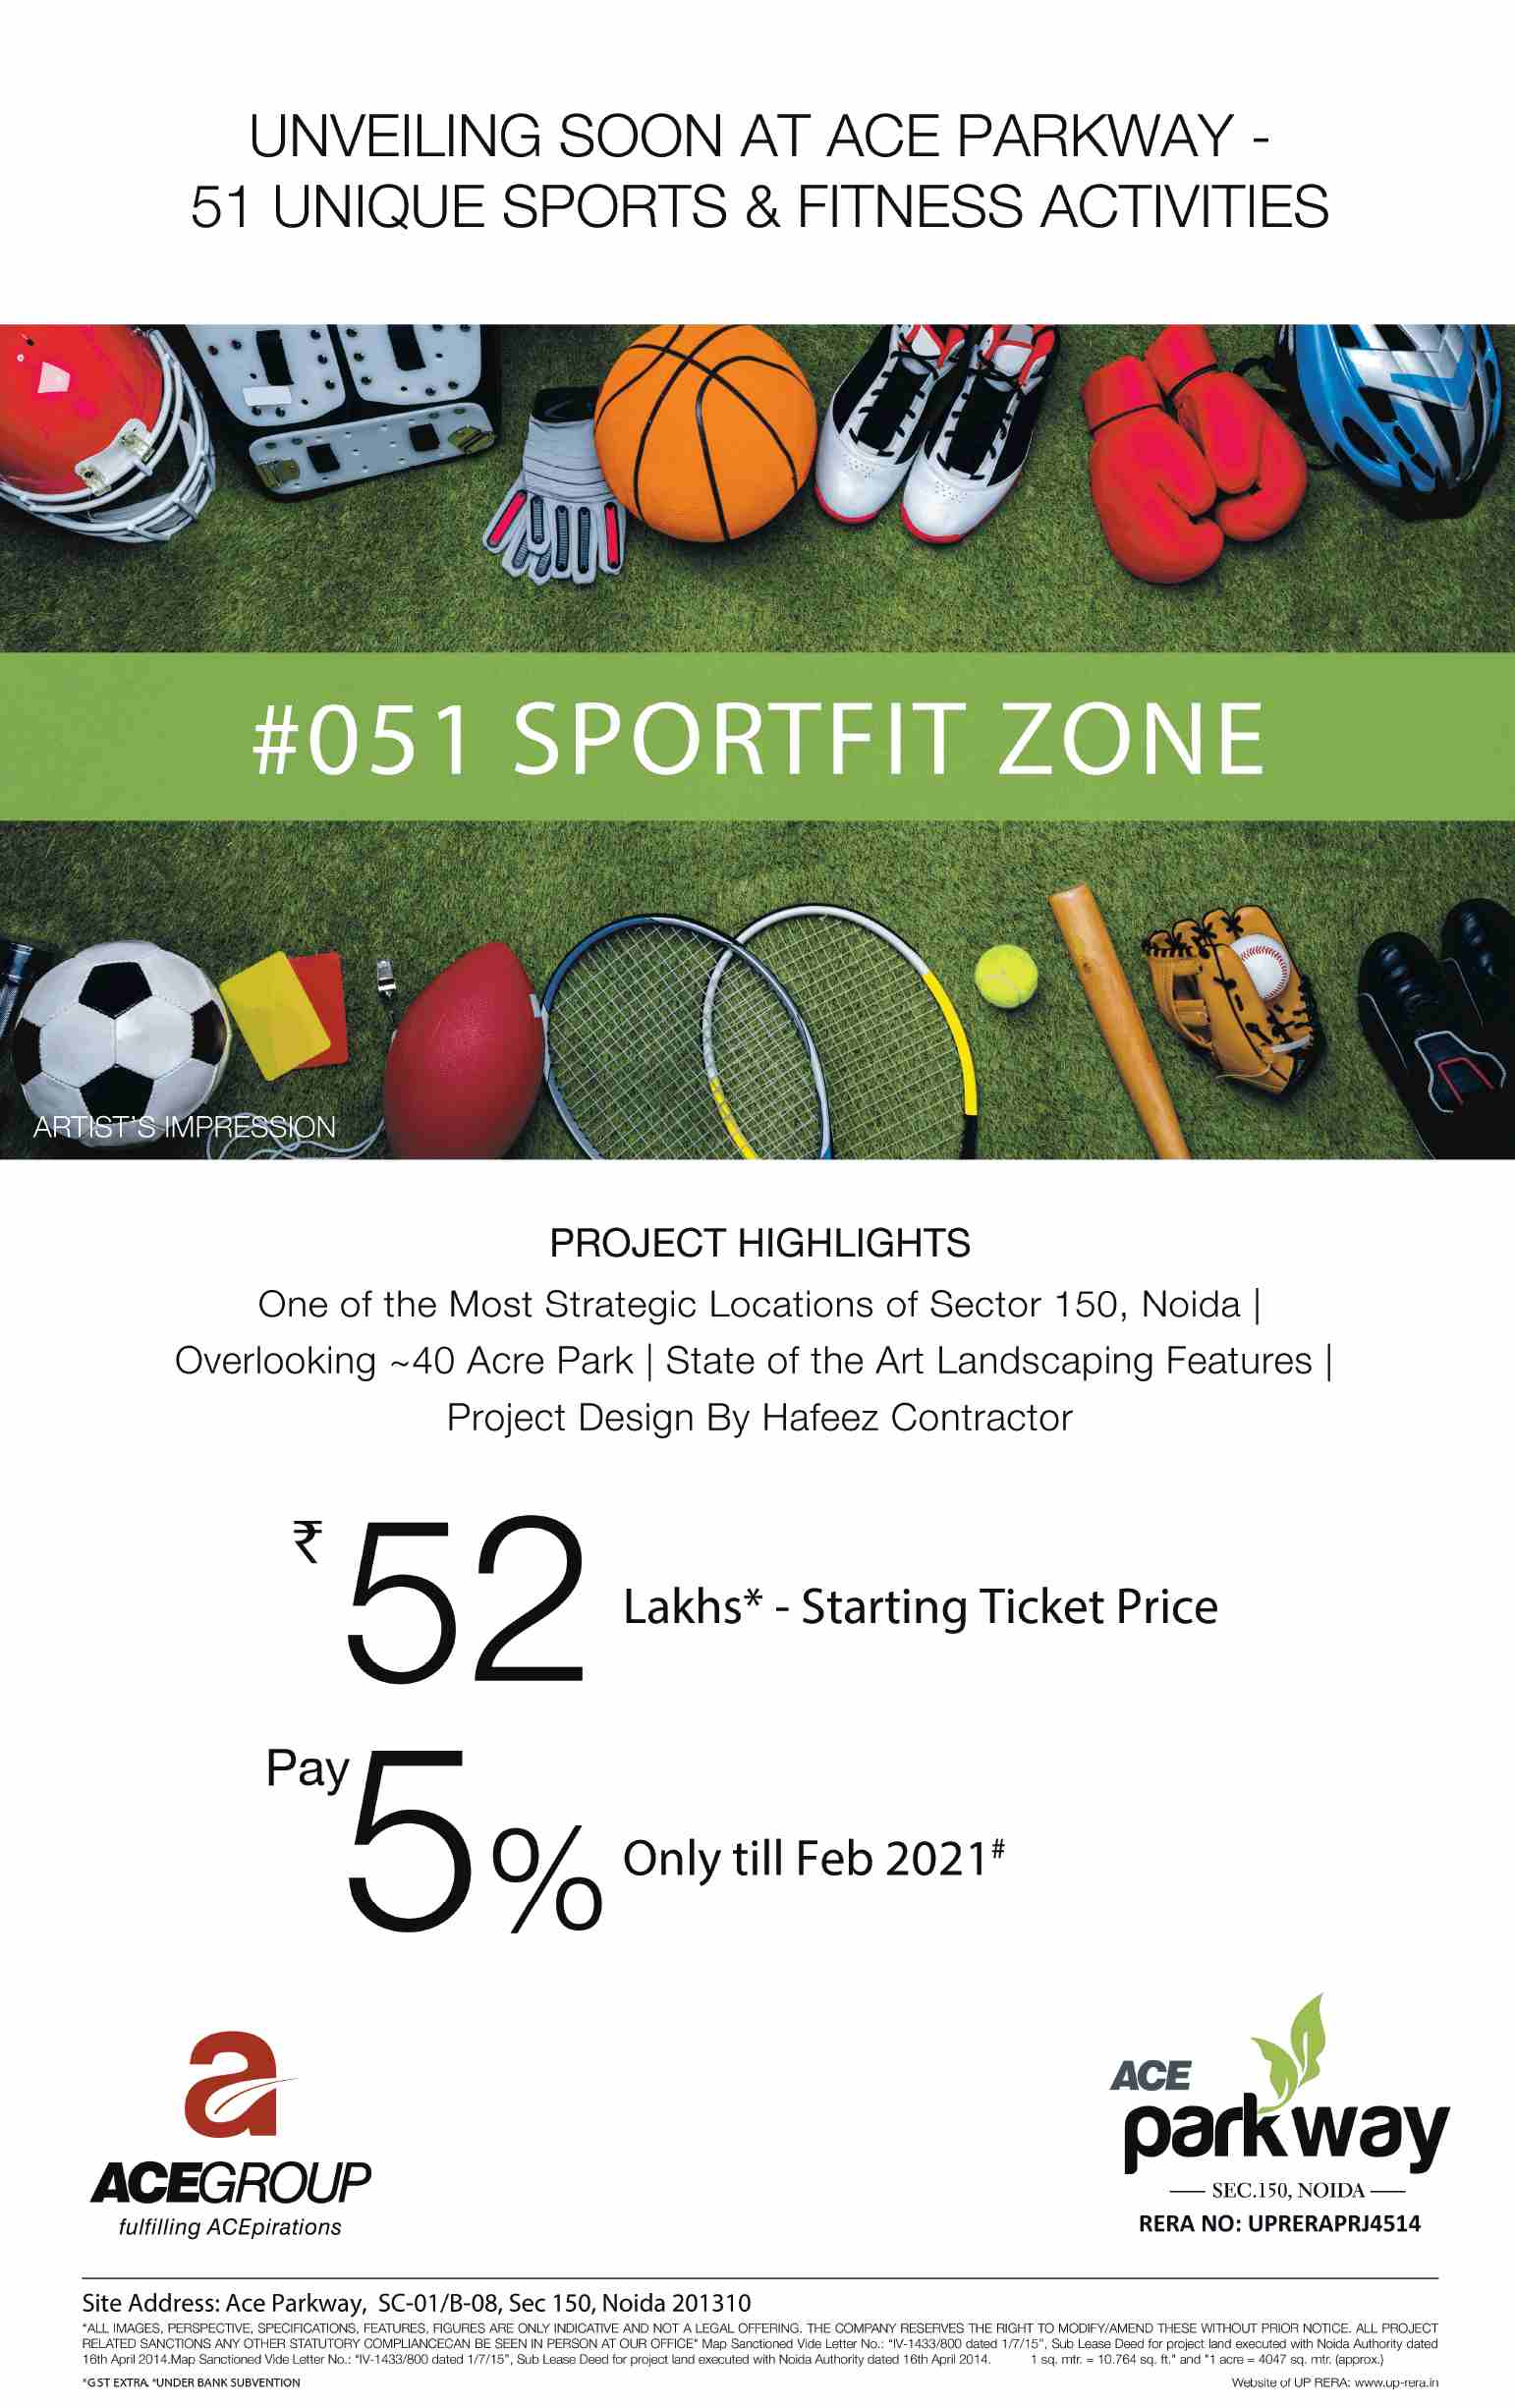 Unveiling 51 unique sports and fitness activities at Ace Parkway in Noida Update